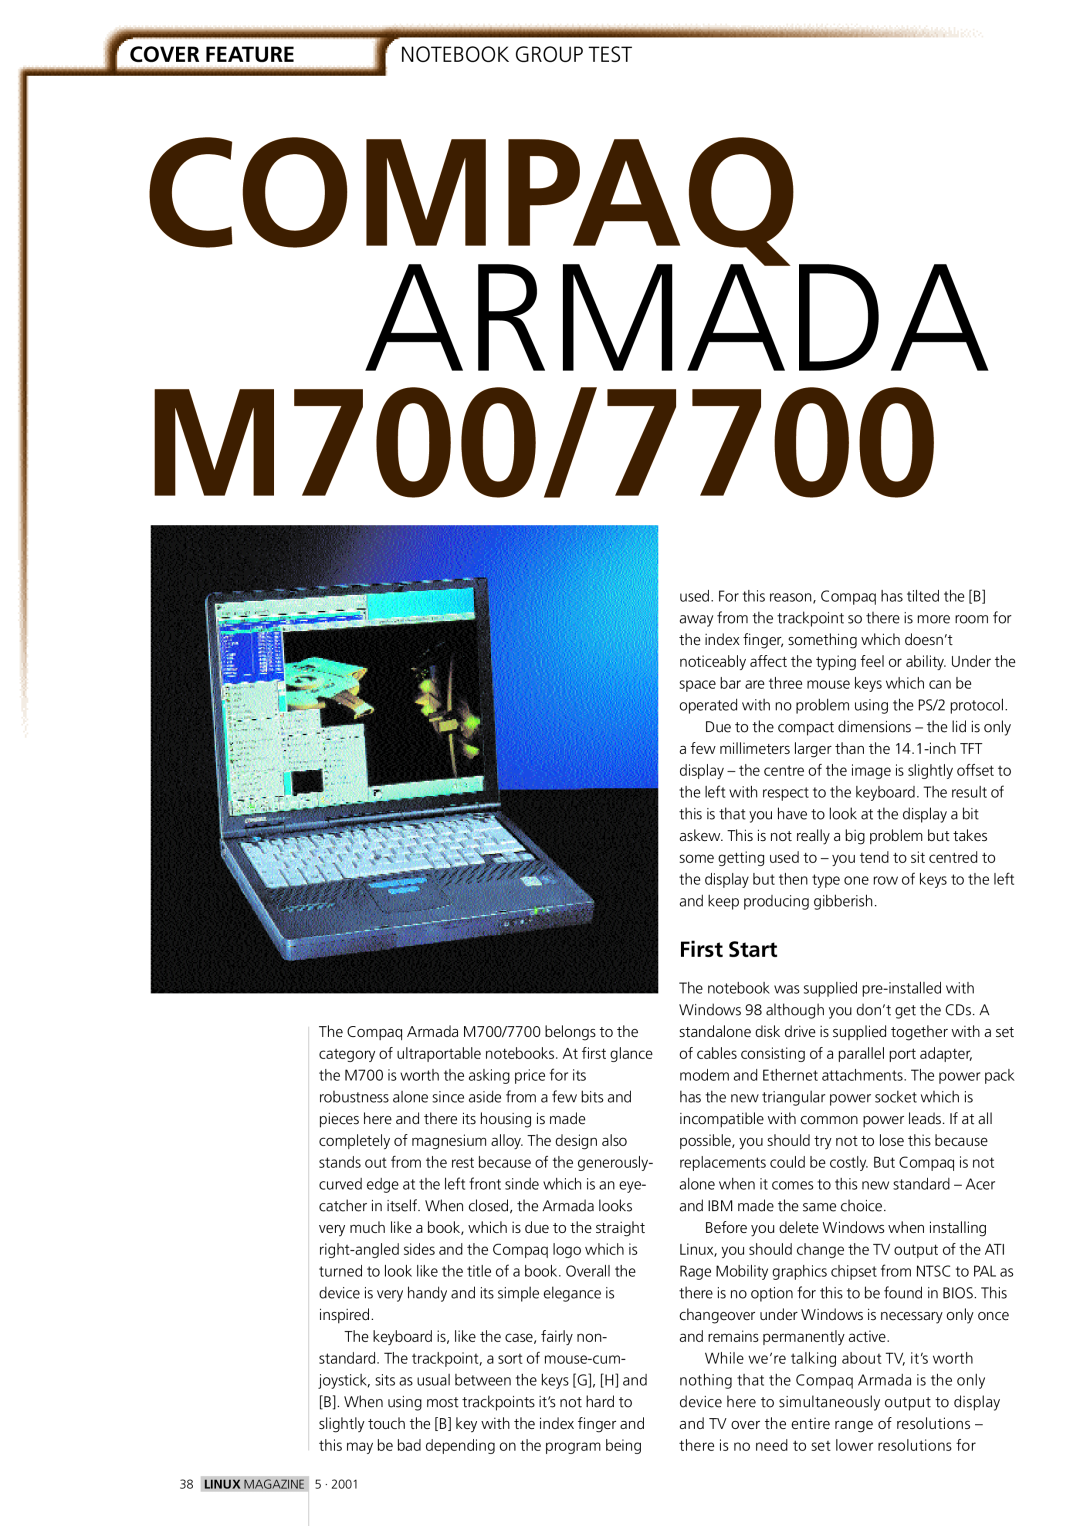 Compaq M700/7700 dimensions Cover Feature, First Start, Compaq, Armada, Notebook Group Test 